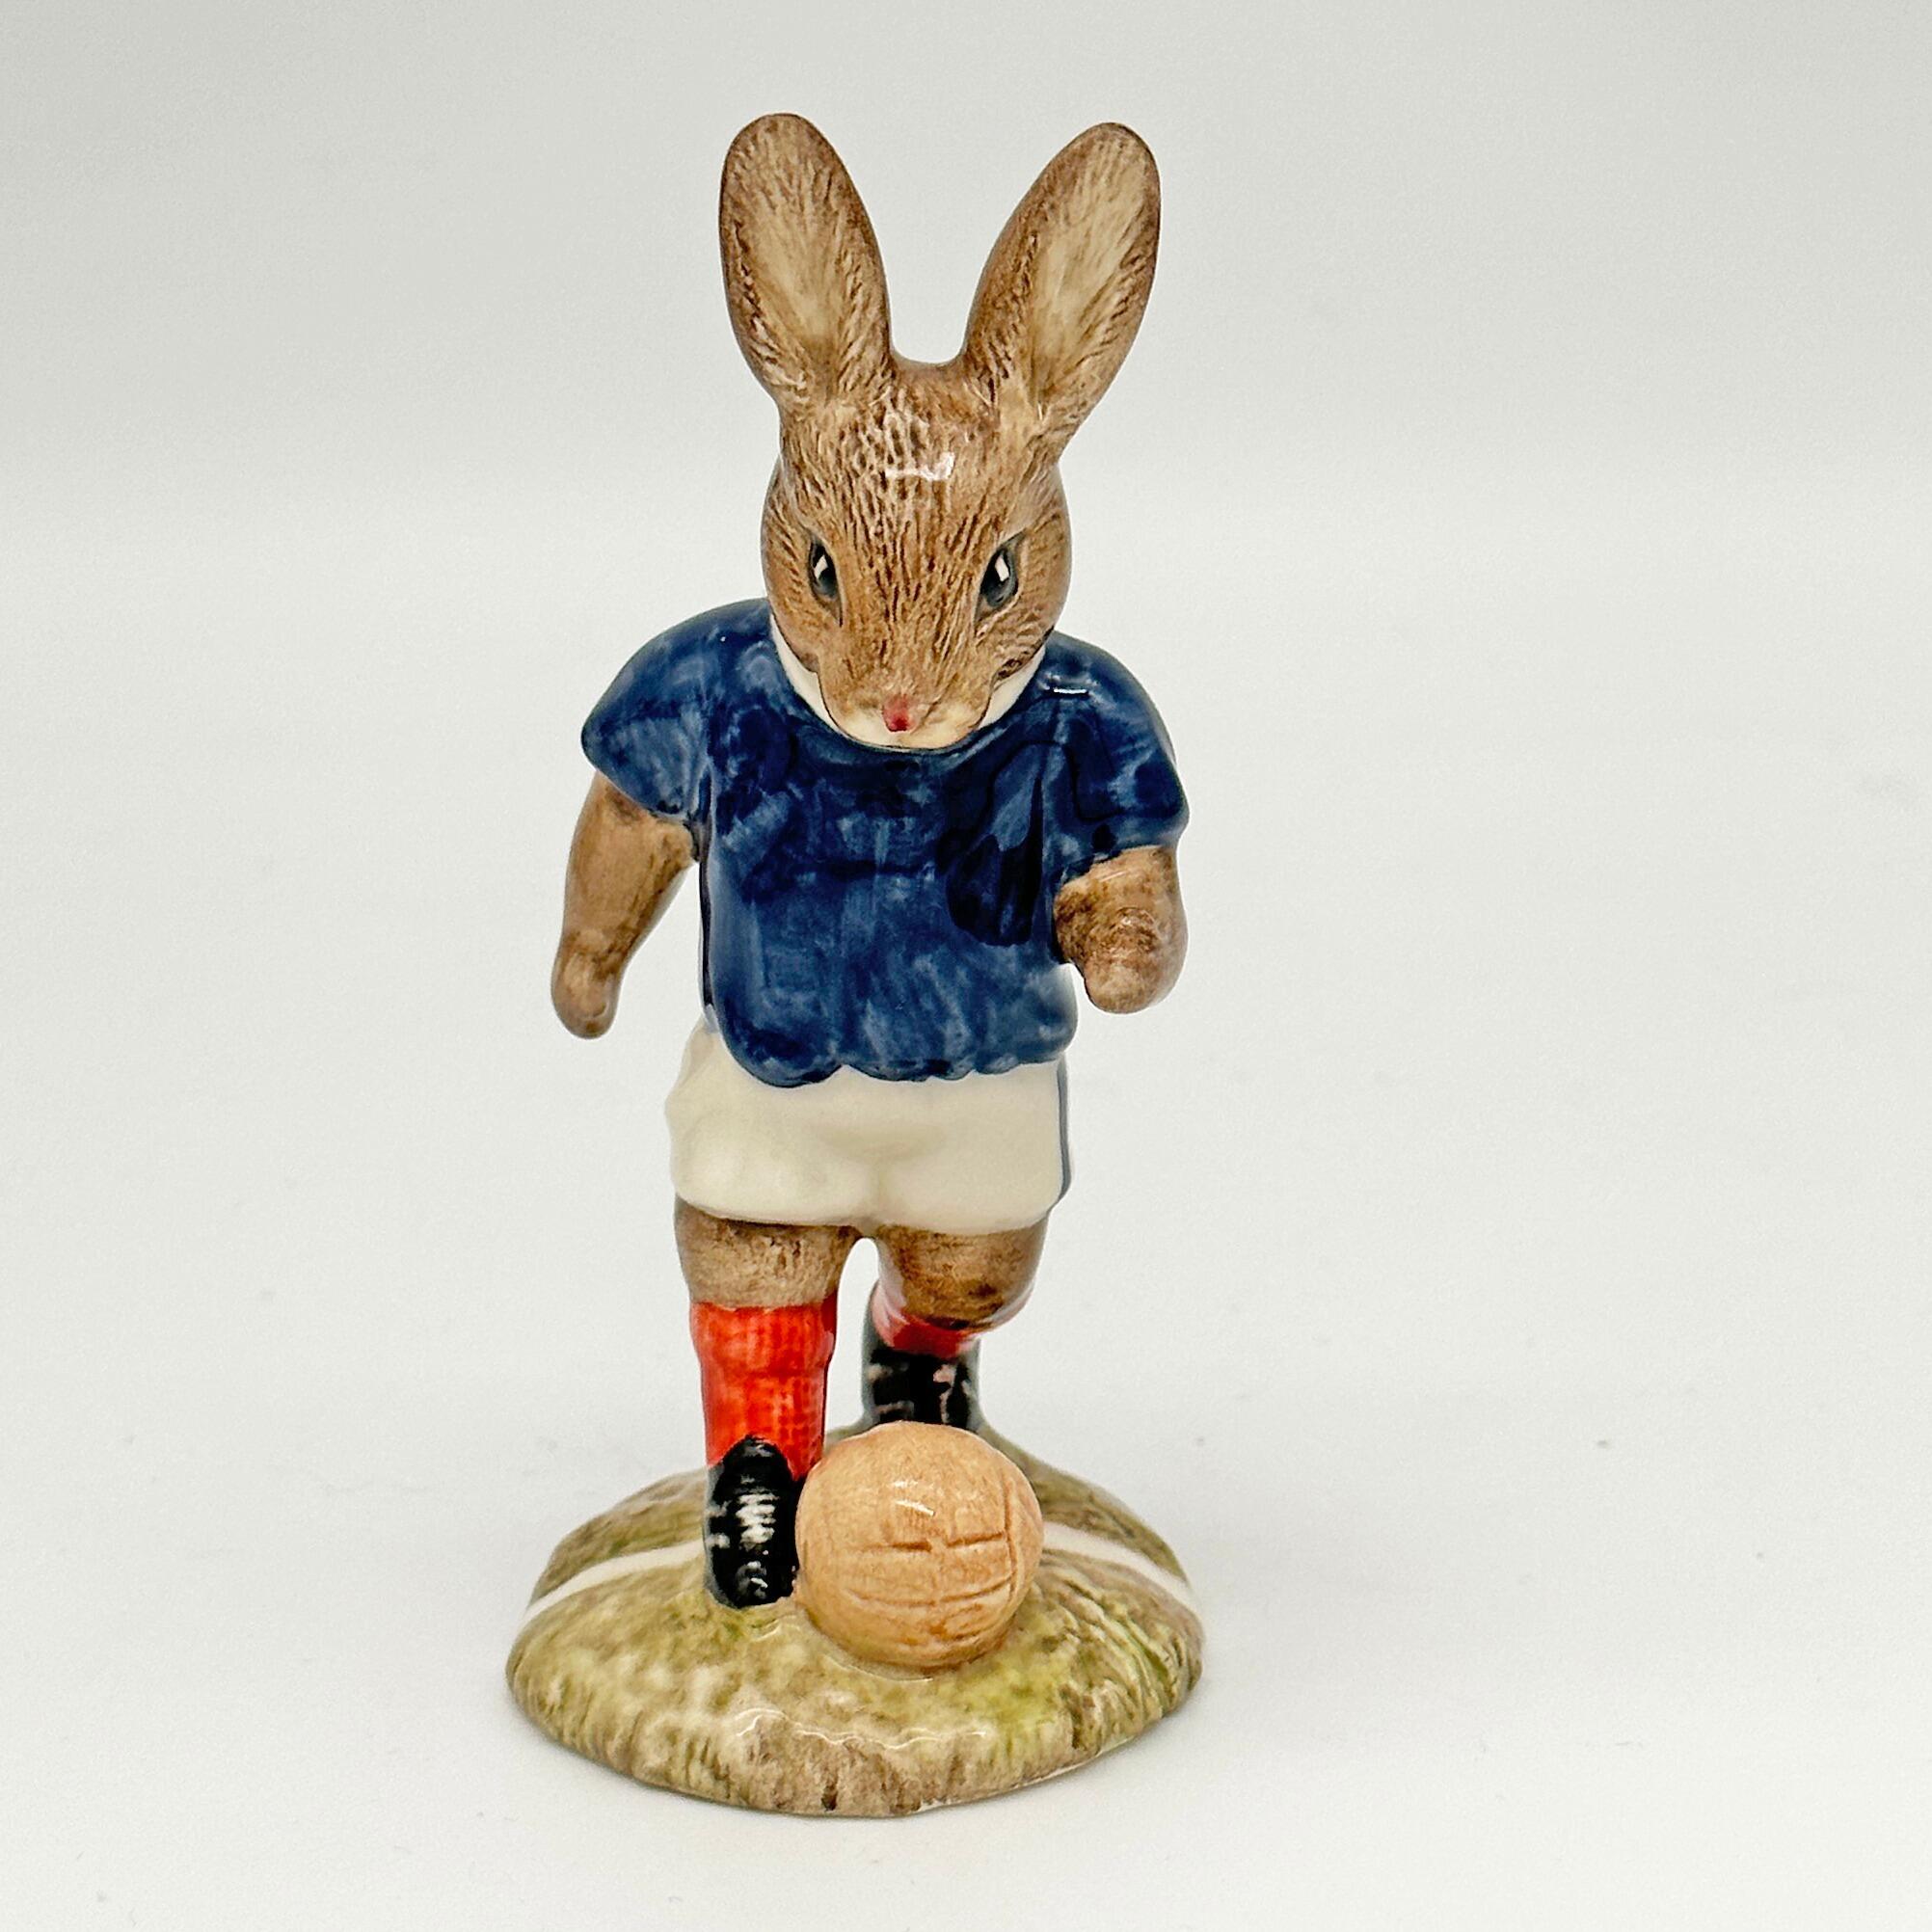 Royal Doulton Bunnykins figure - DB123 Soccer Playerin Blue and White - front